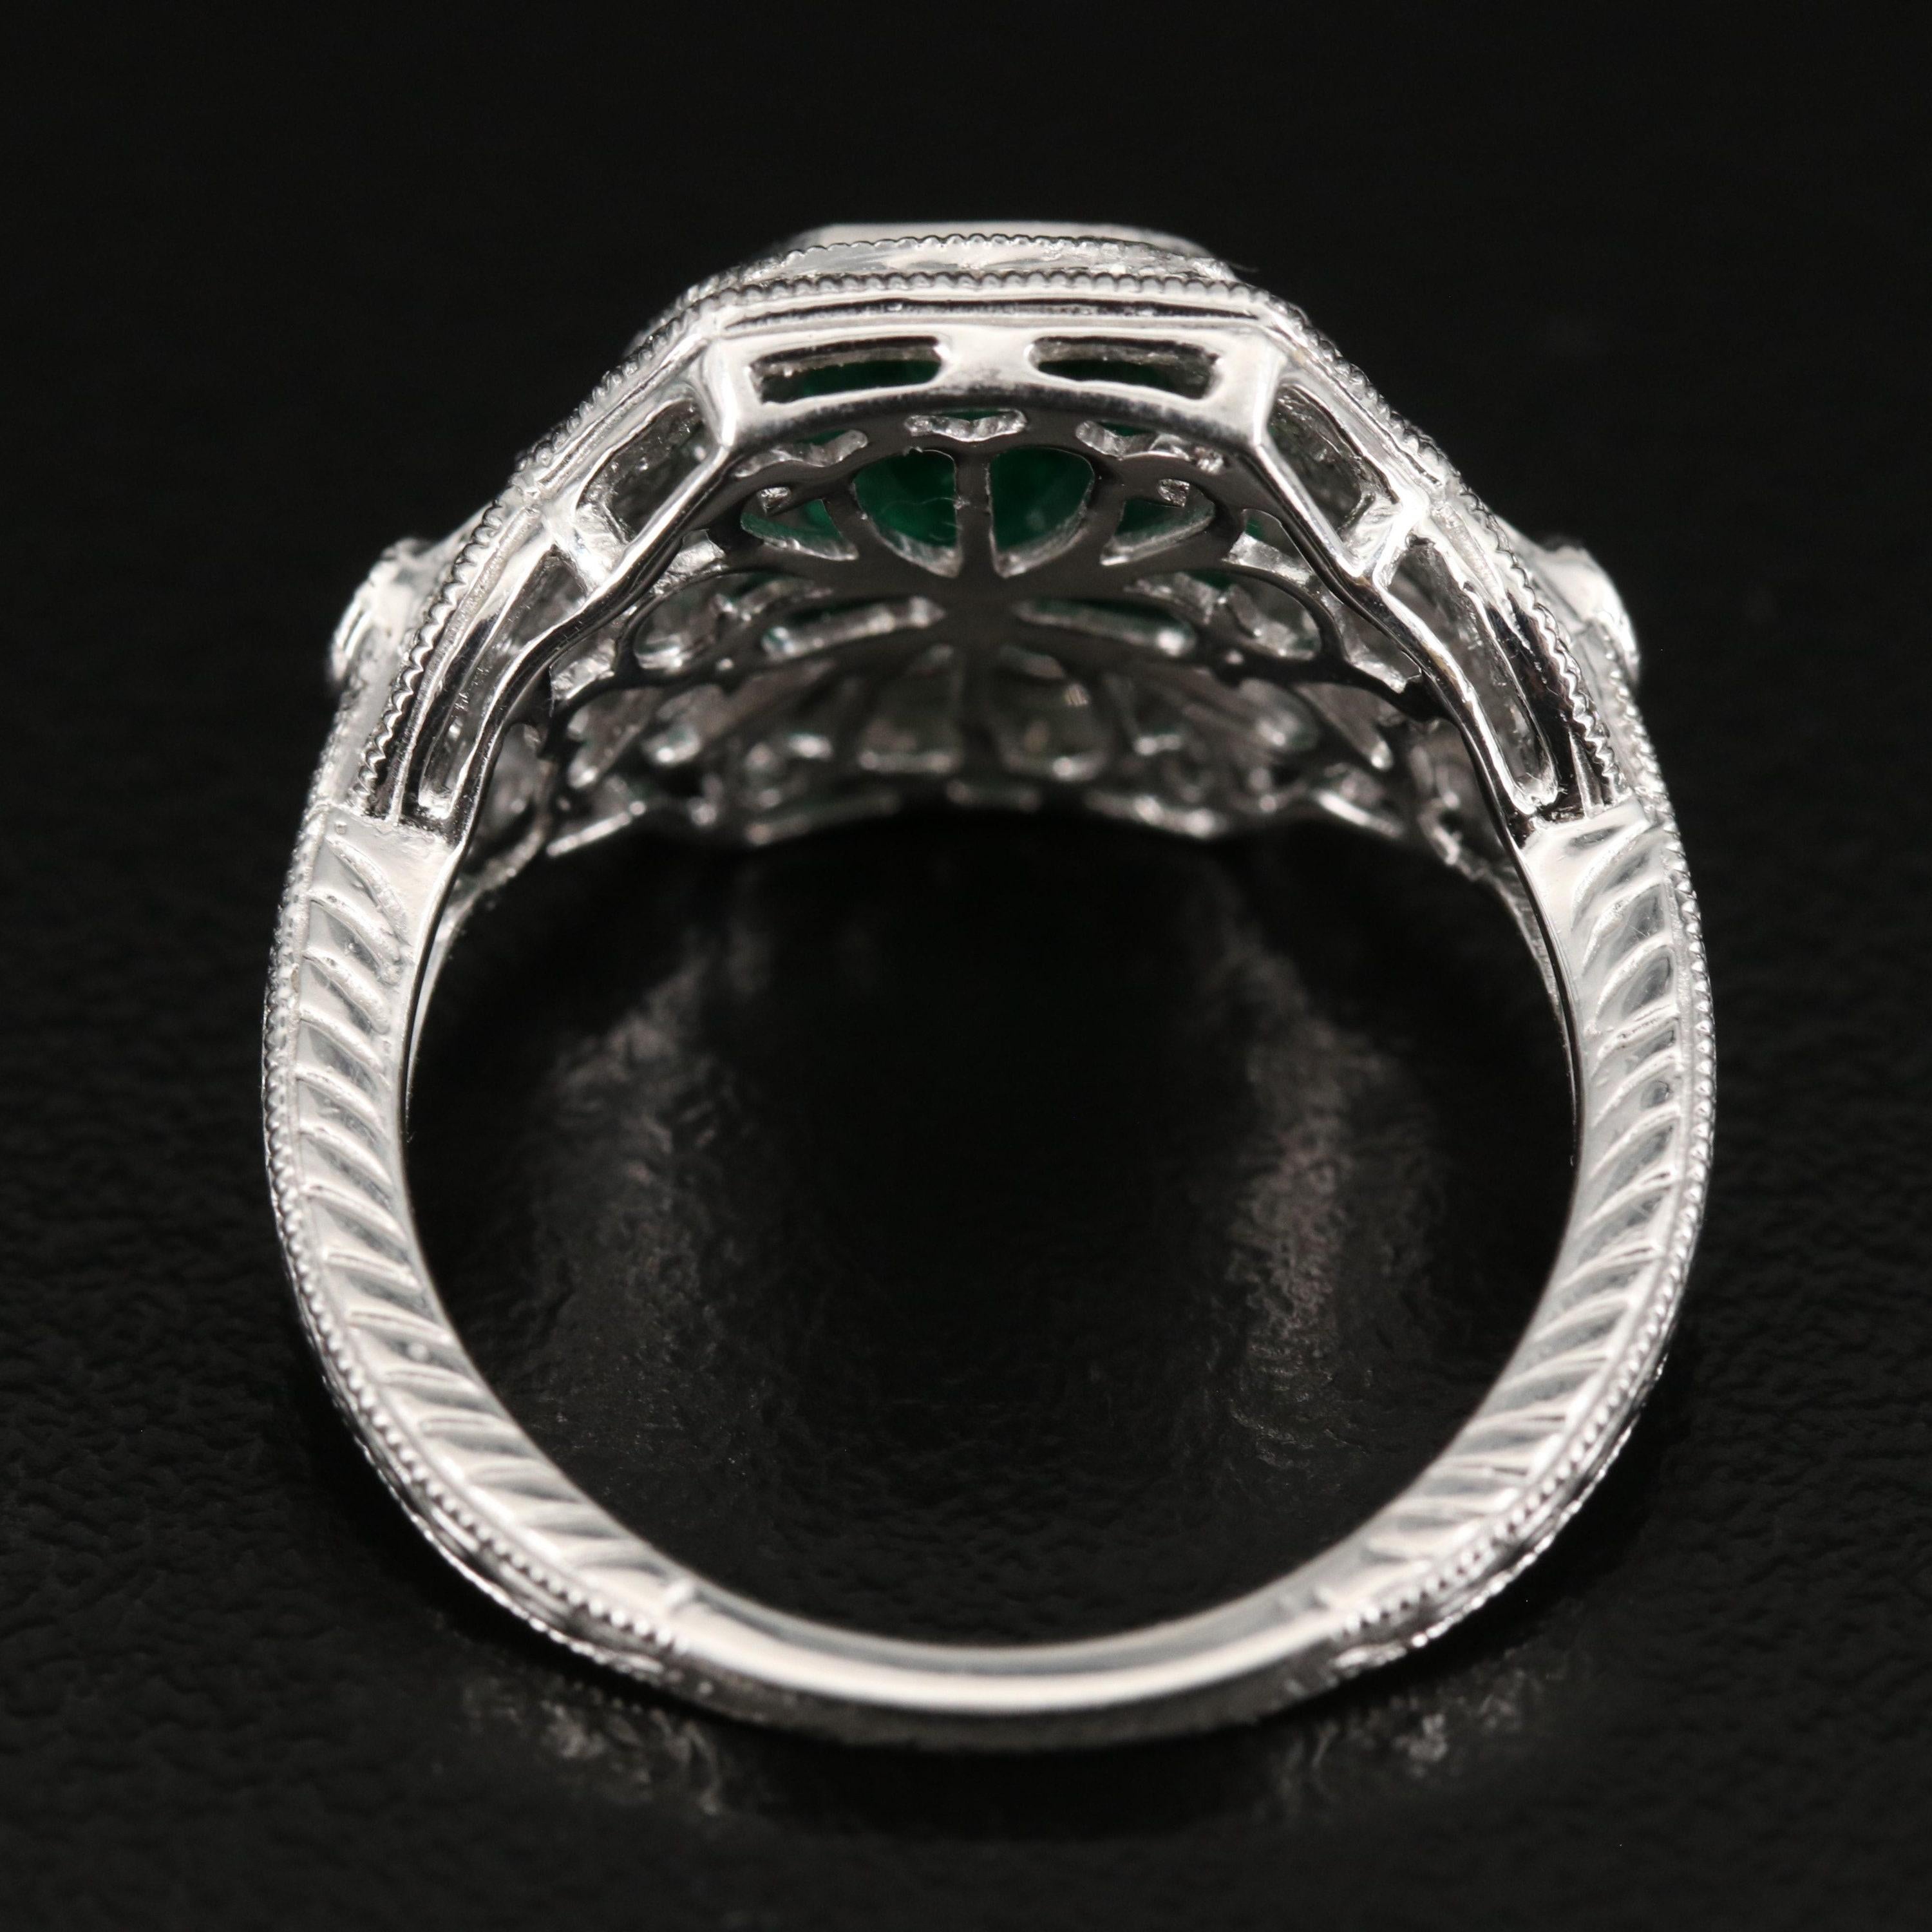 For Sale:  Vintage 4.2 Carat Emerald Diamond Engagement Ring, Cluster Diamond Cocktail Ring 5